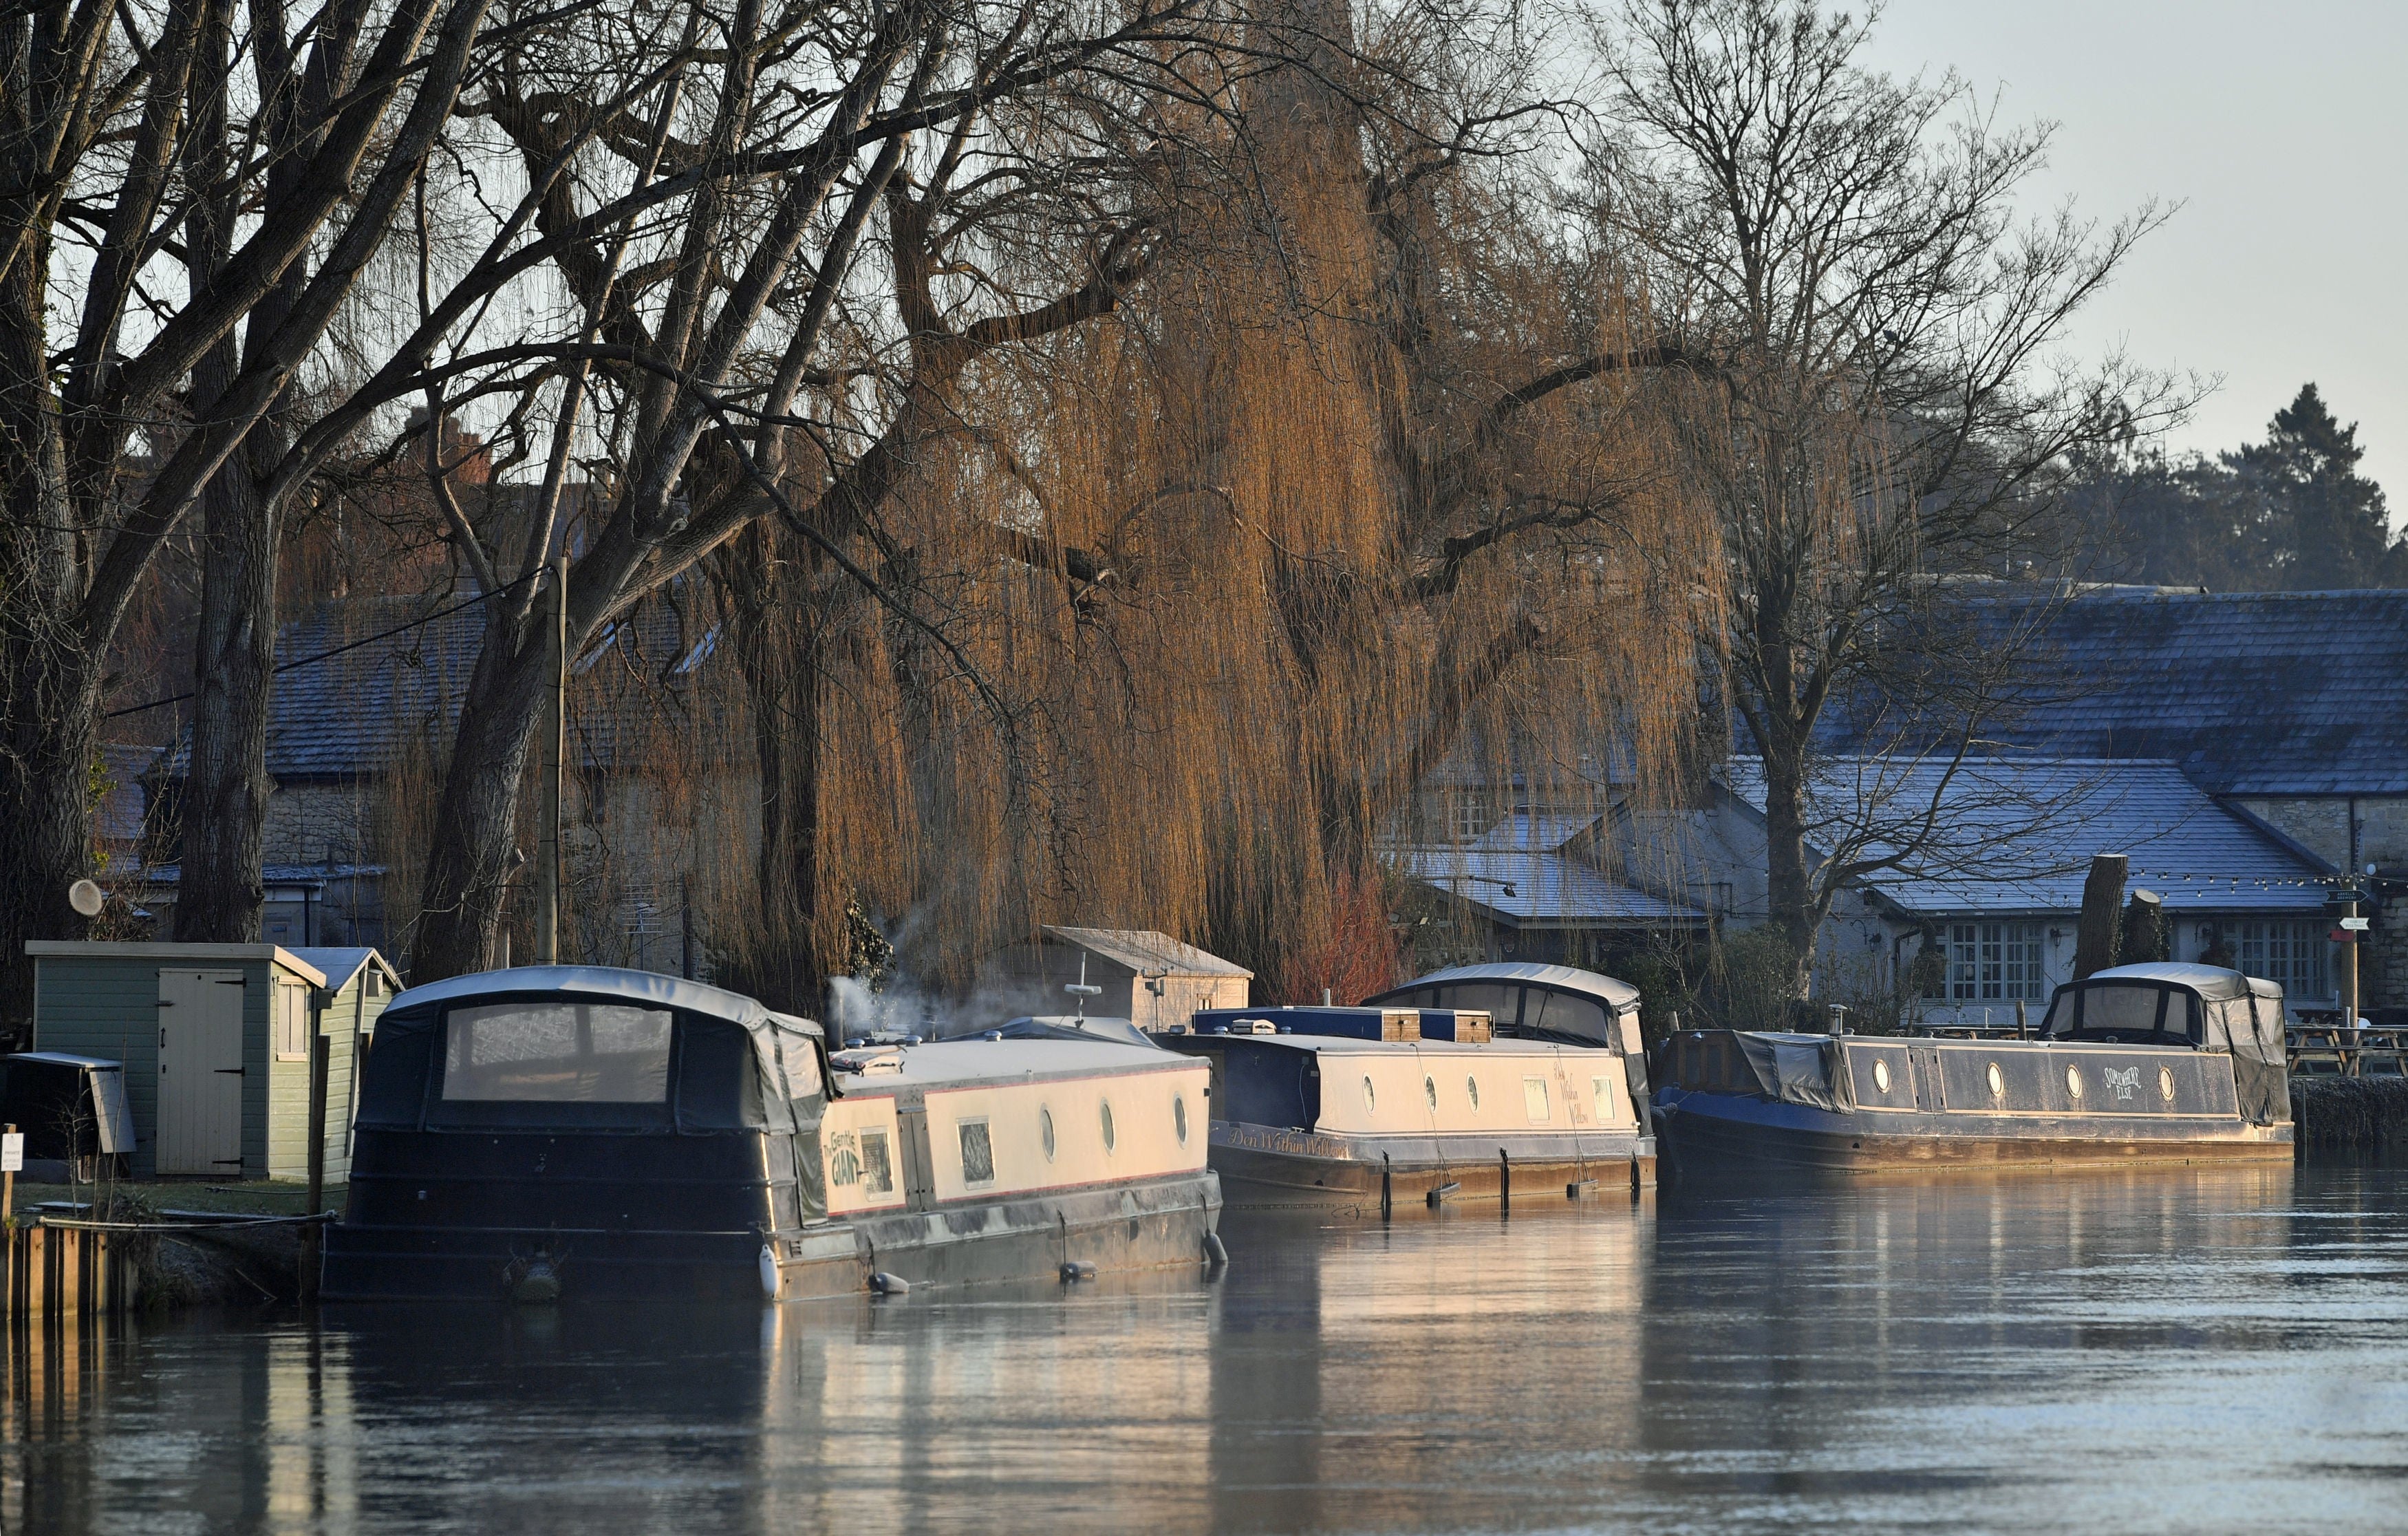 Four teenagers believed to be about 17 had been in the River Thames, near Lechlade on Thames